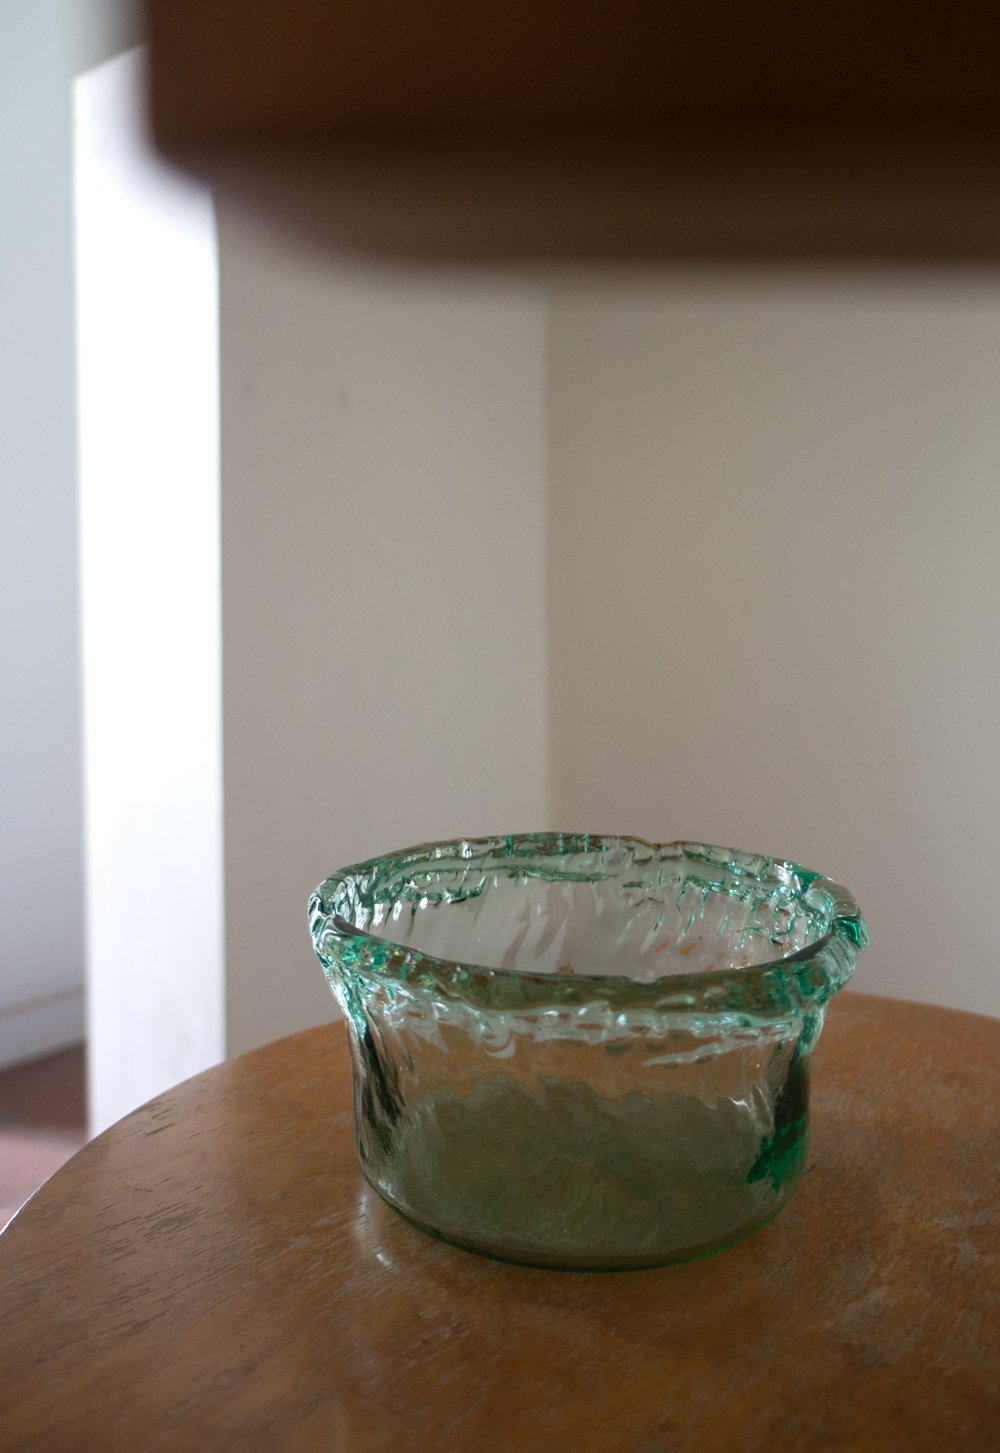 Image of icy green glass bowl